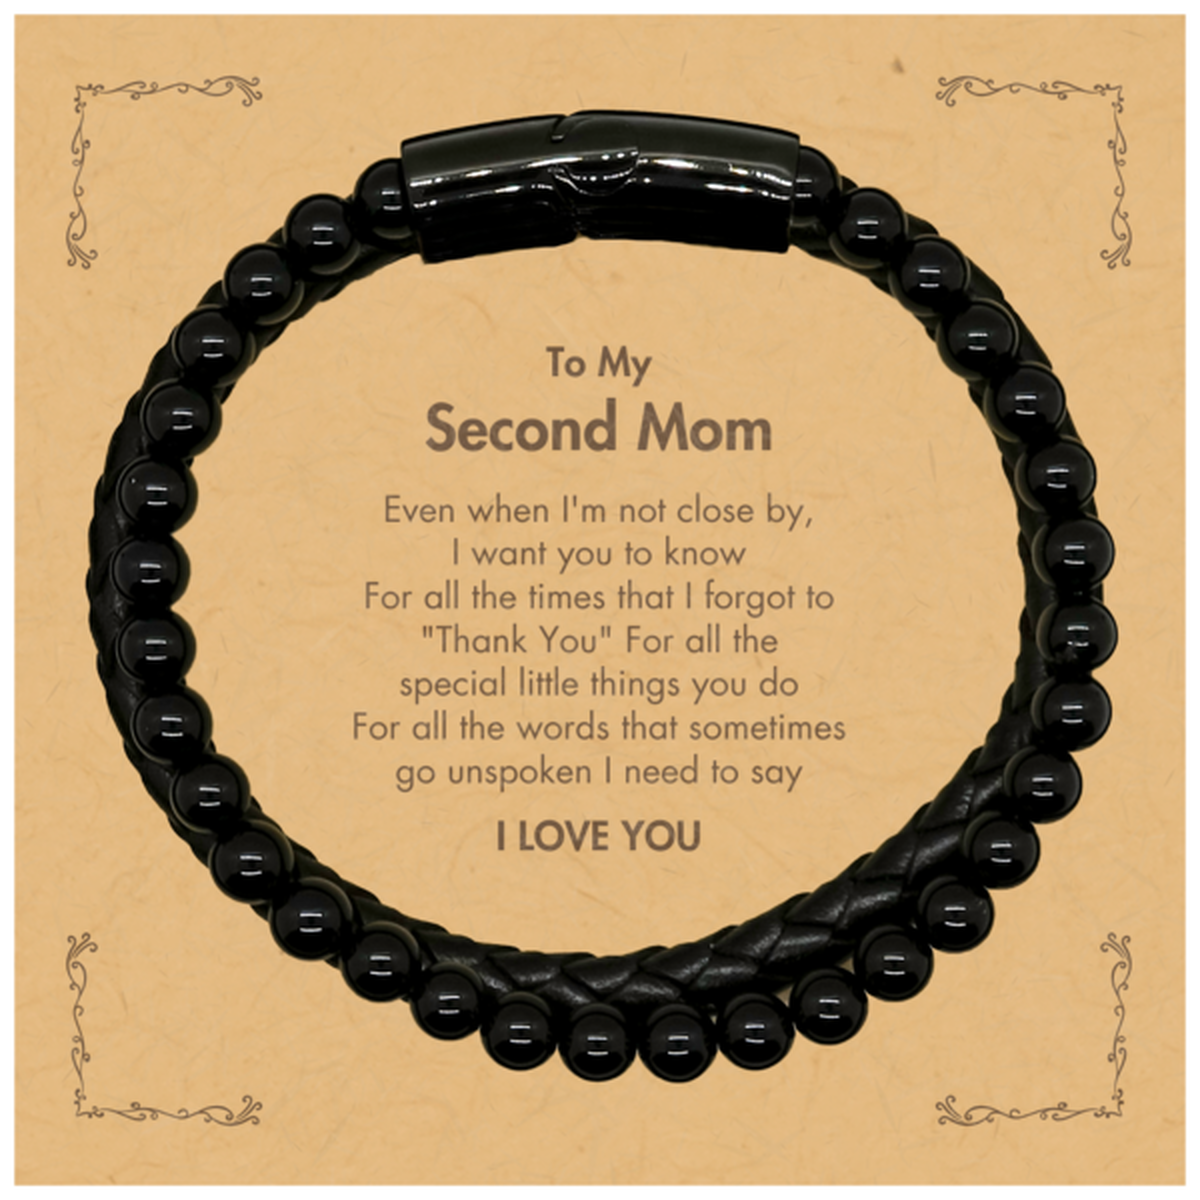 Thank You Gifts for Second Mom, Keepsake Stone Leather Bracelets Gifts for Second Mom Birthday Mother's day Father's Day Second Mom For all the words That sometimes go unspoken I need to say I LOVE YOU